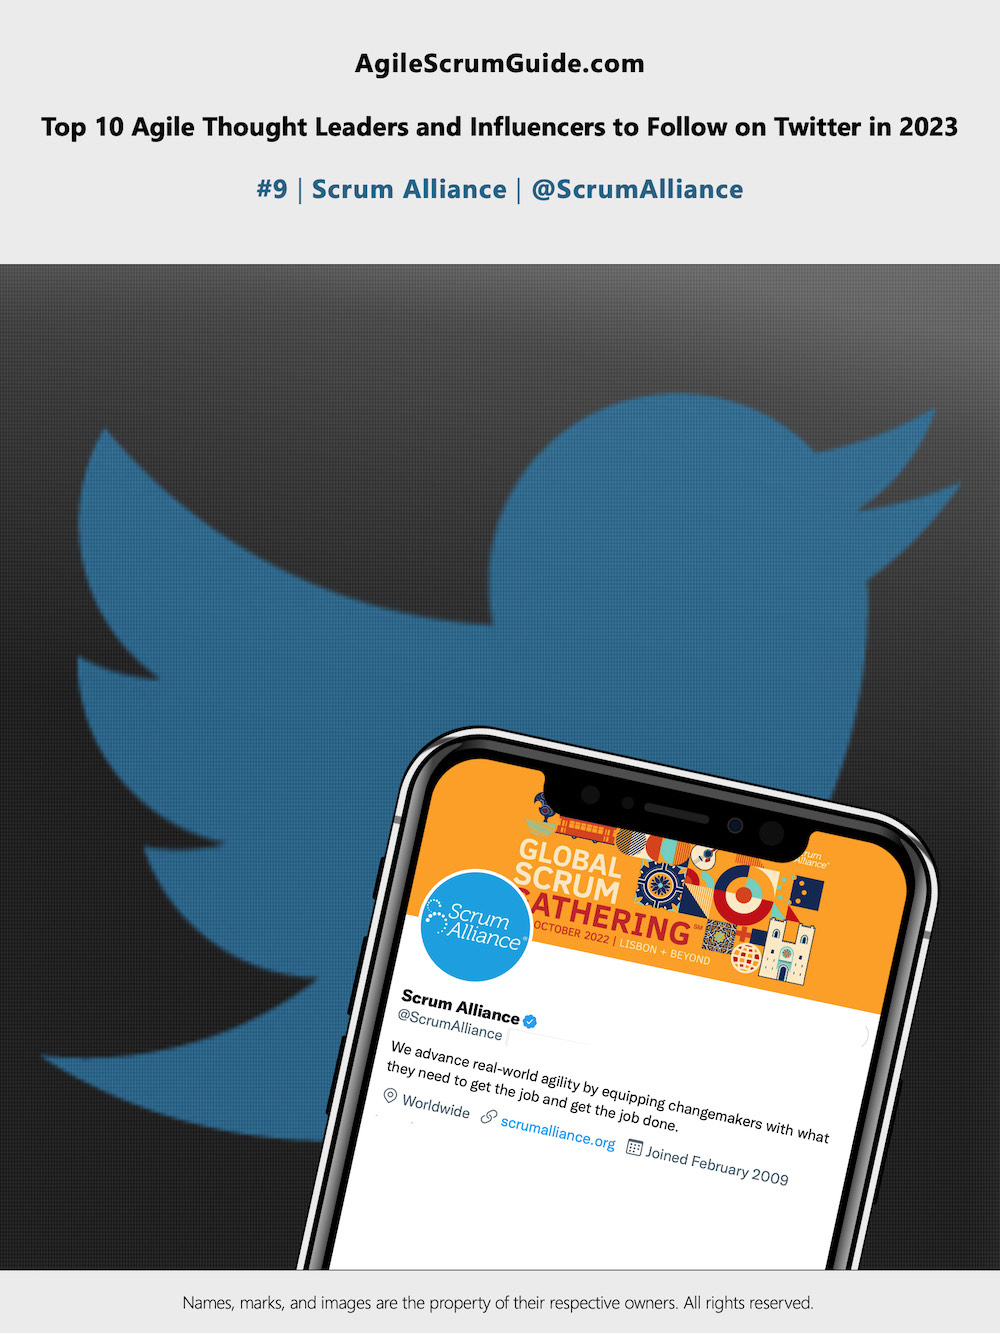 AgileScrumGuide_com - Top 10 Agile Thought Leaders and Influencers to Follow on Twitter in 2023 - 09 - LR-SQ